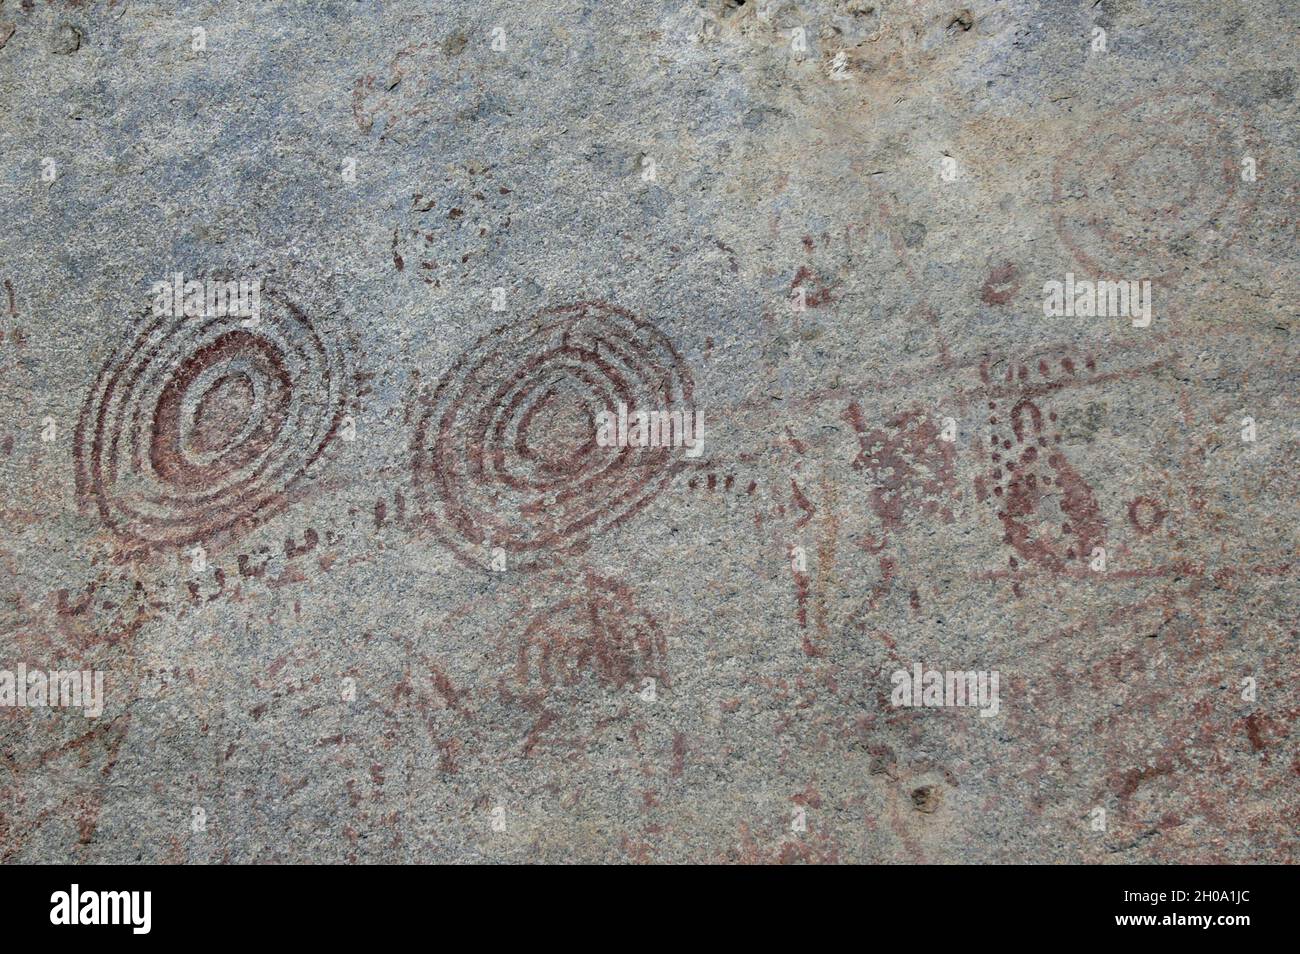 Rock paintings, believed to be dated from the Stone Age and over 1,000 years old, found in the town of Nyero about 300 km northeast of the capital city of Kampala. Uganda. 2006. Stock Photo